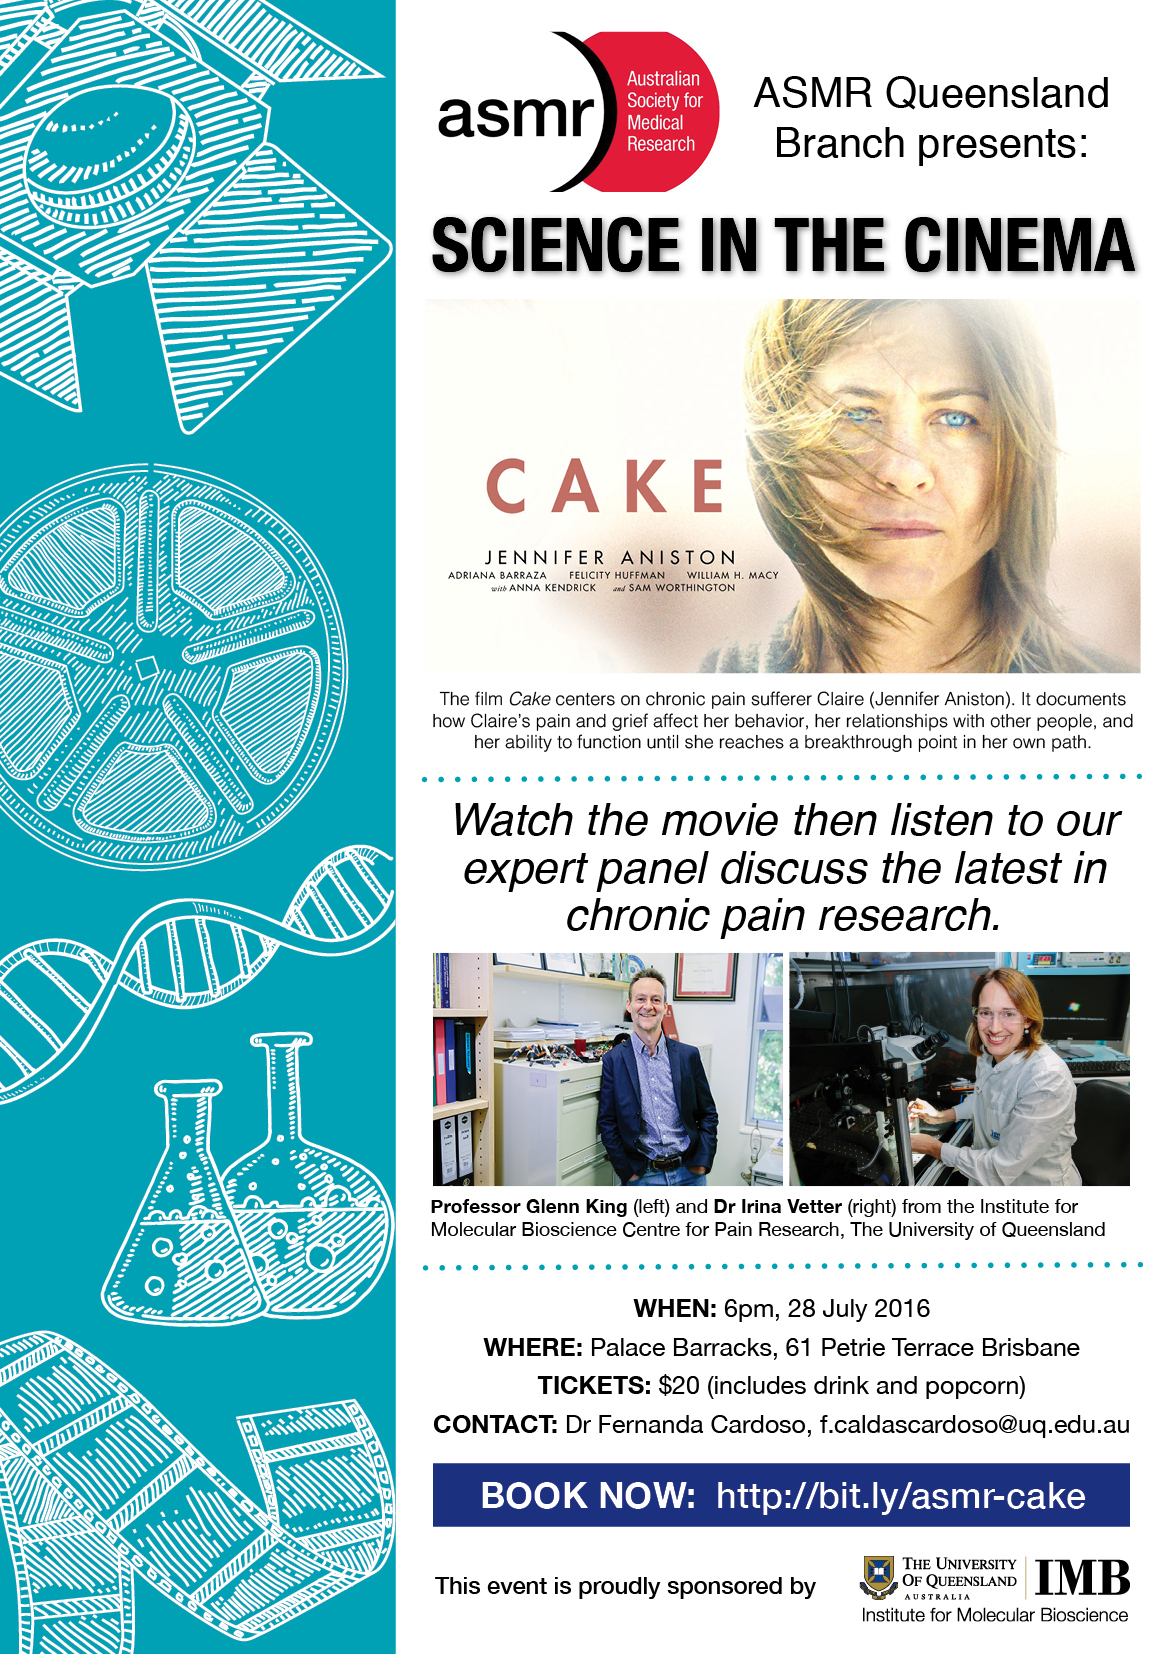 ASMR Science in the Cinema event poster